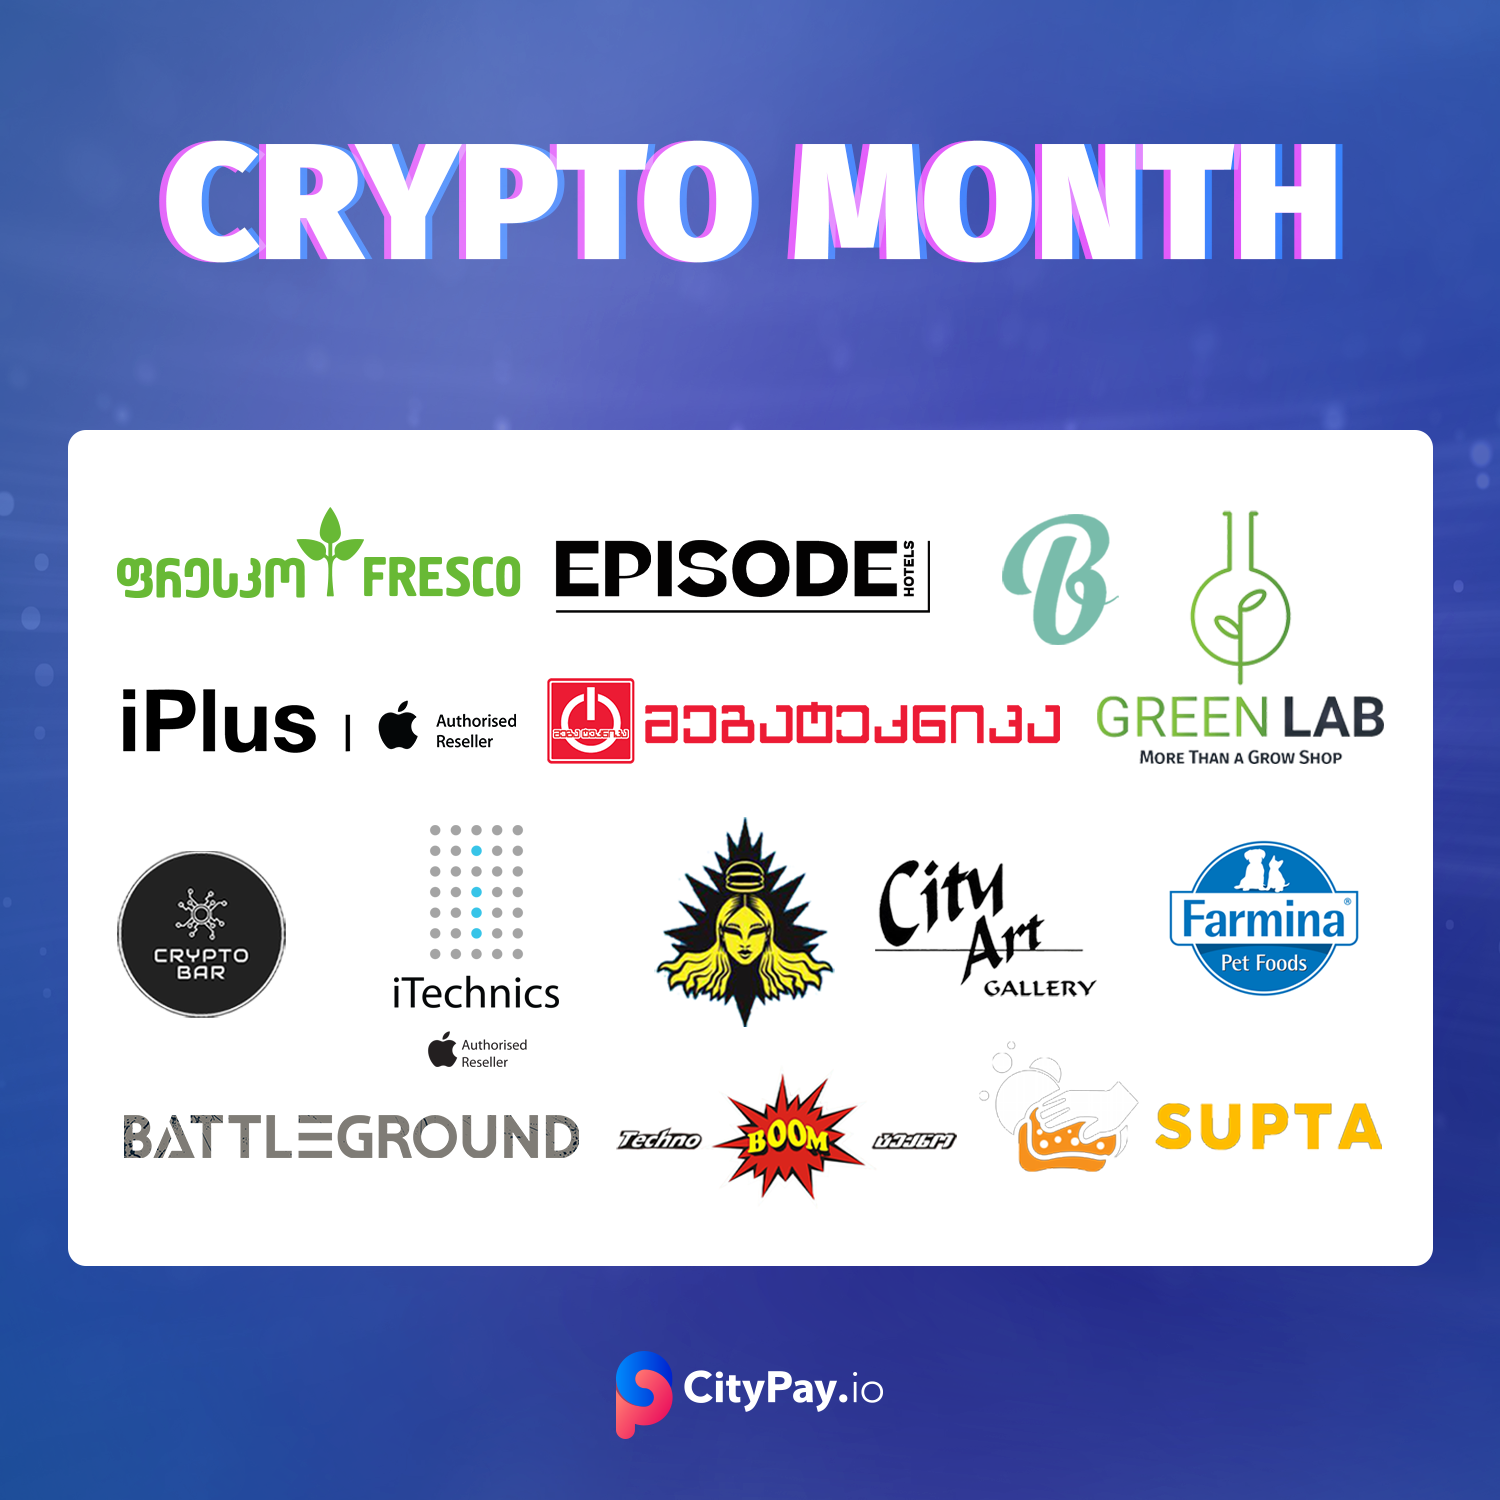 Crypto Month has started!